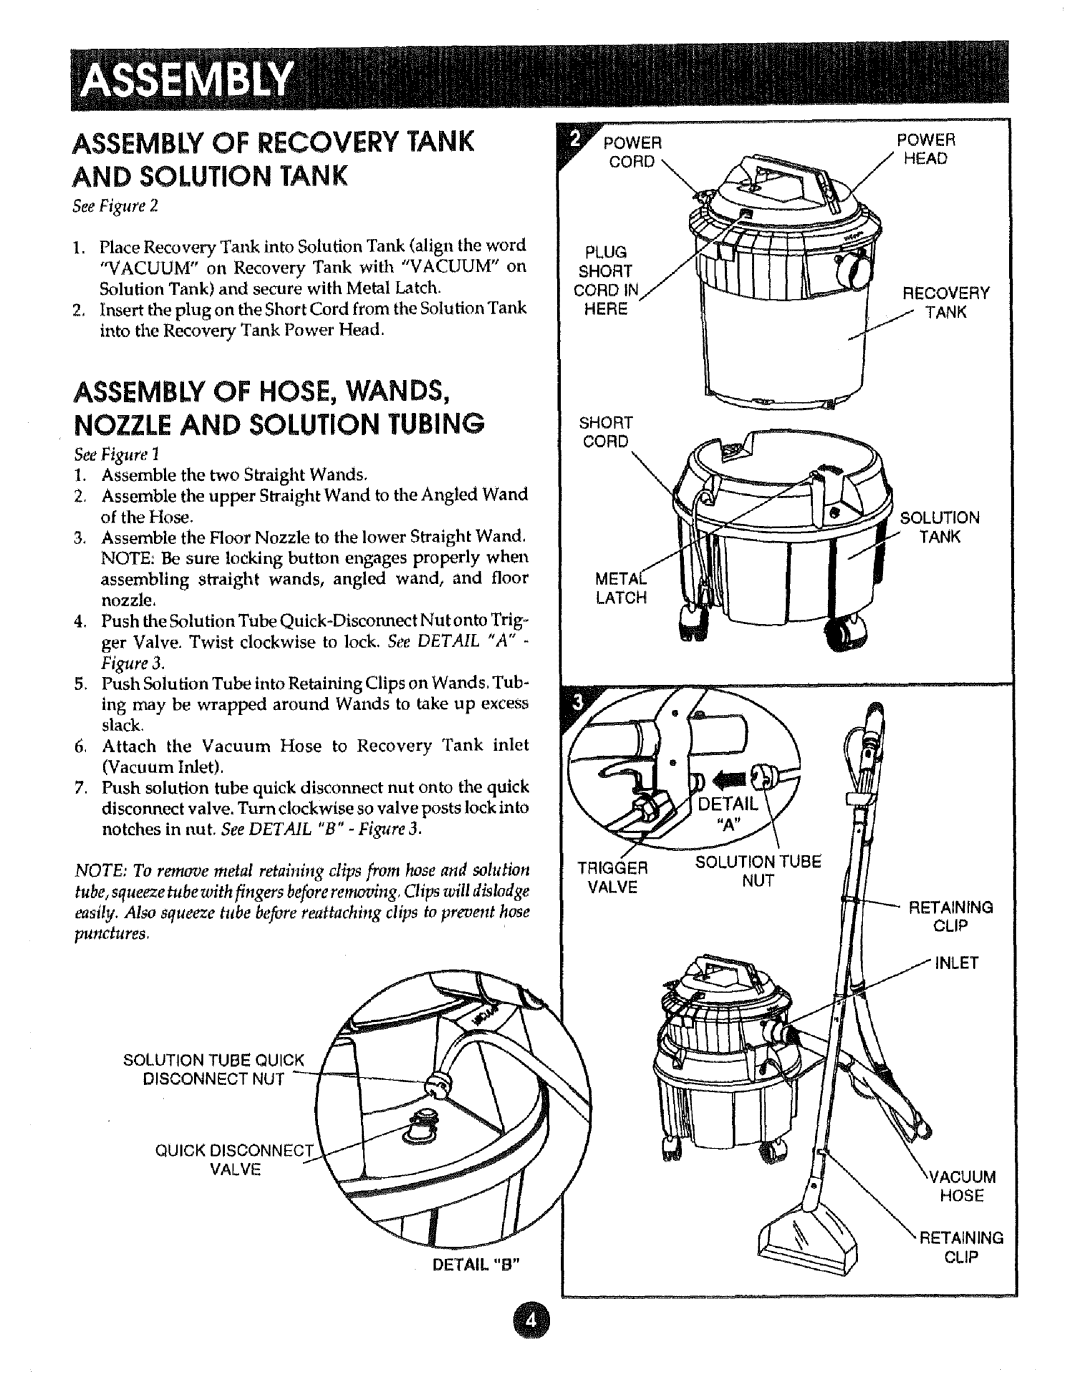 Sears 175 Assemblyof Recovery Tank, And Solution Tank, Assembw Of Hose, Wands, Nozzle And Solution Tubing, See Figure 